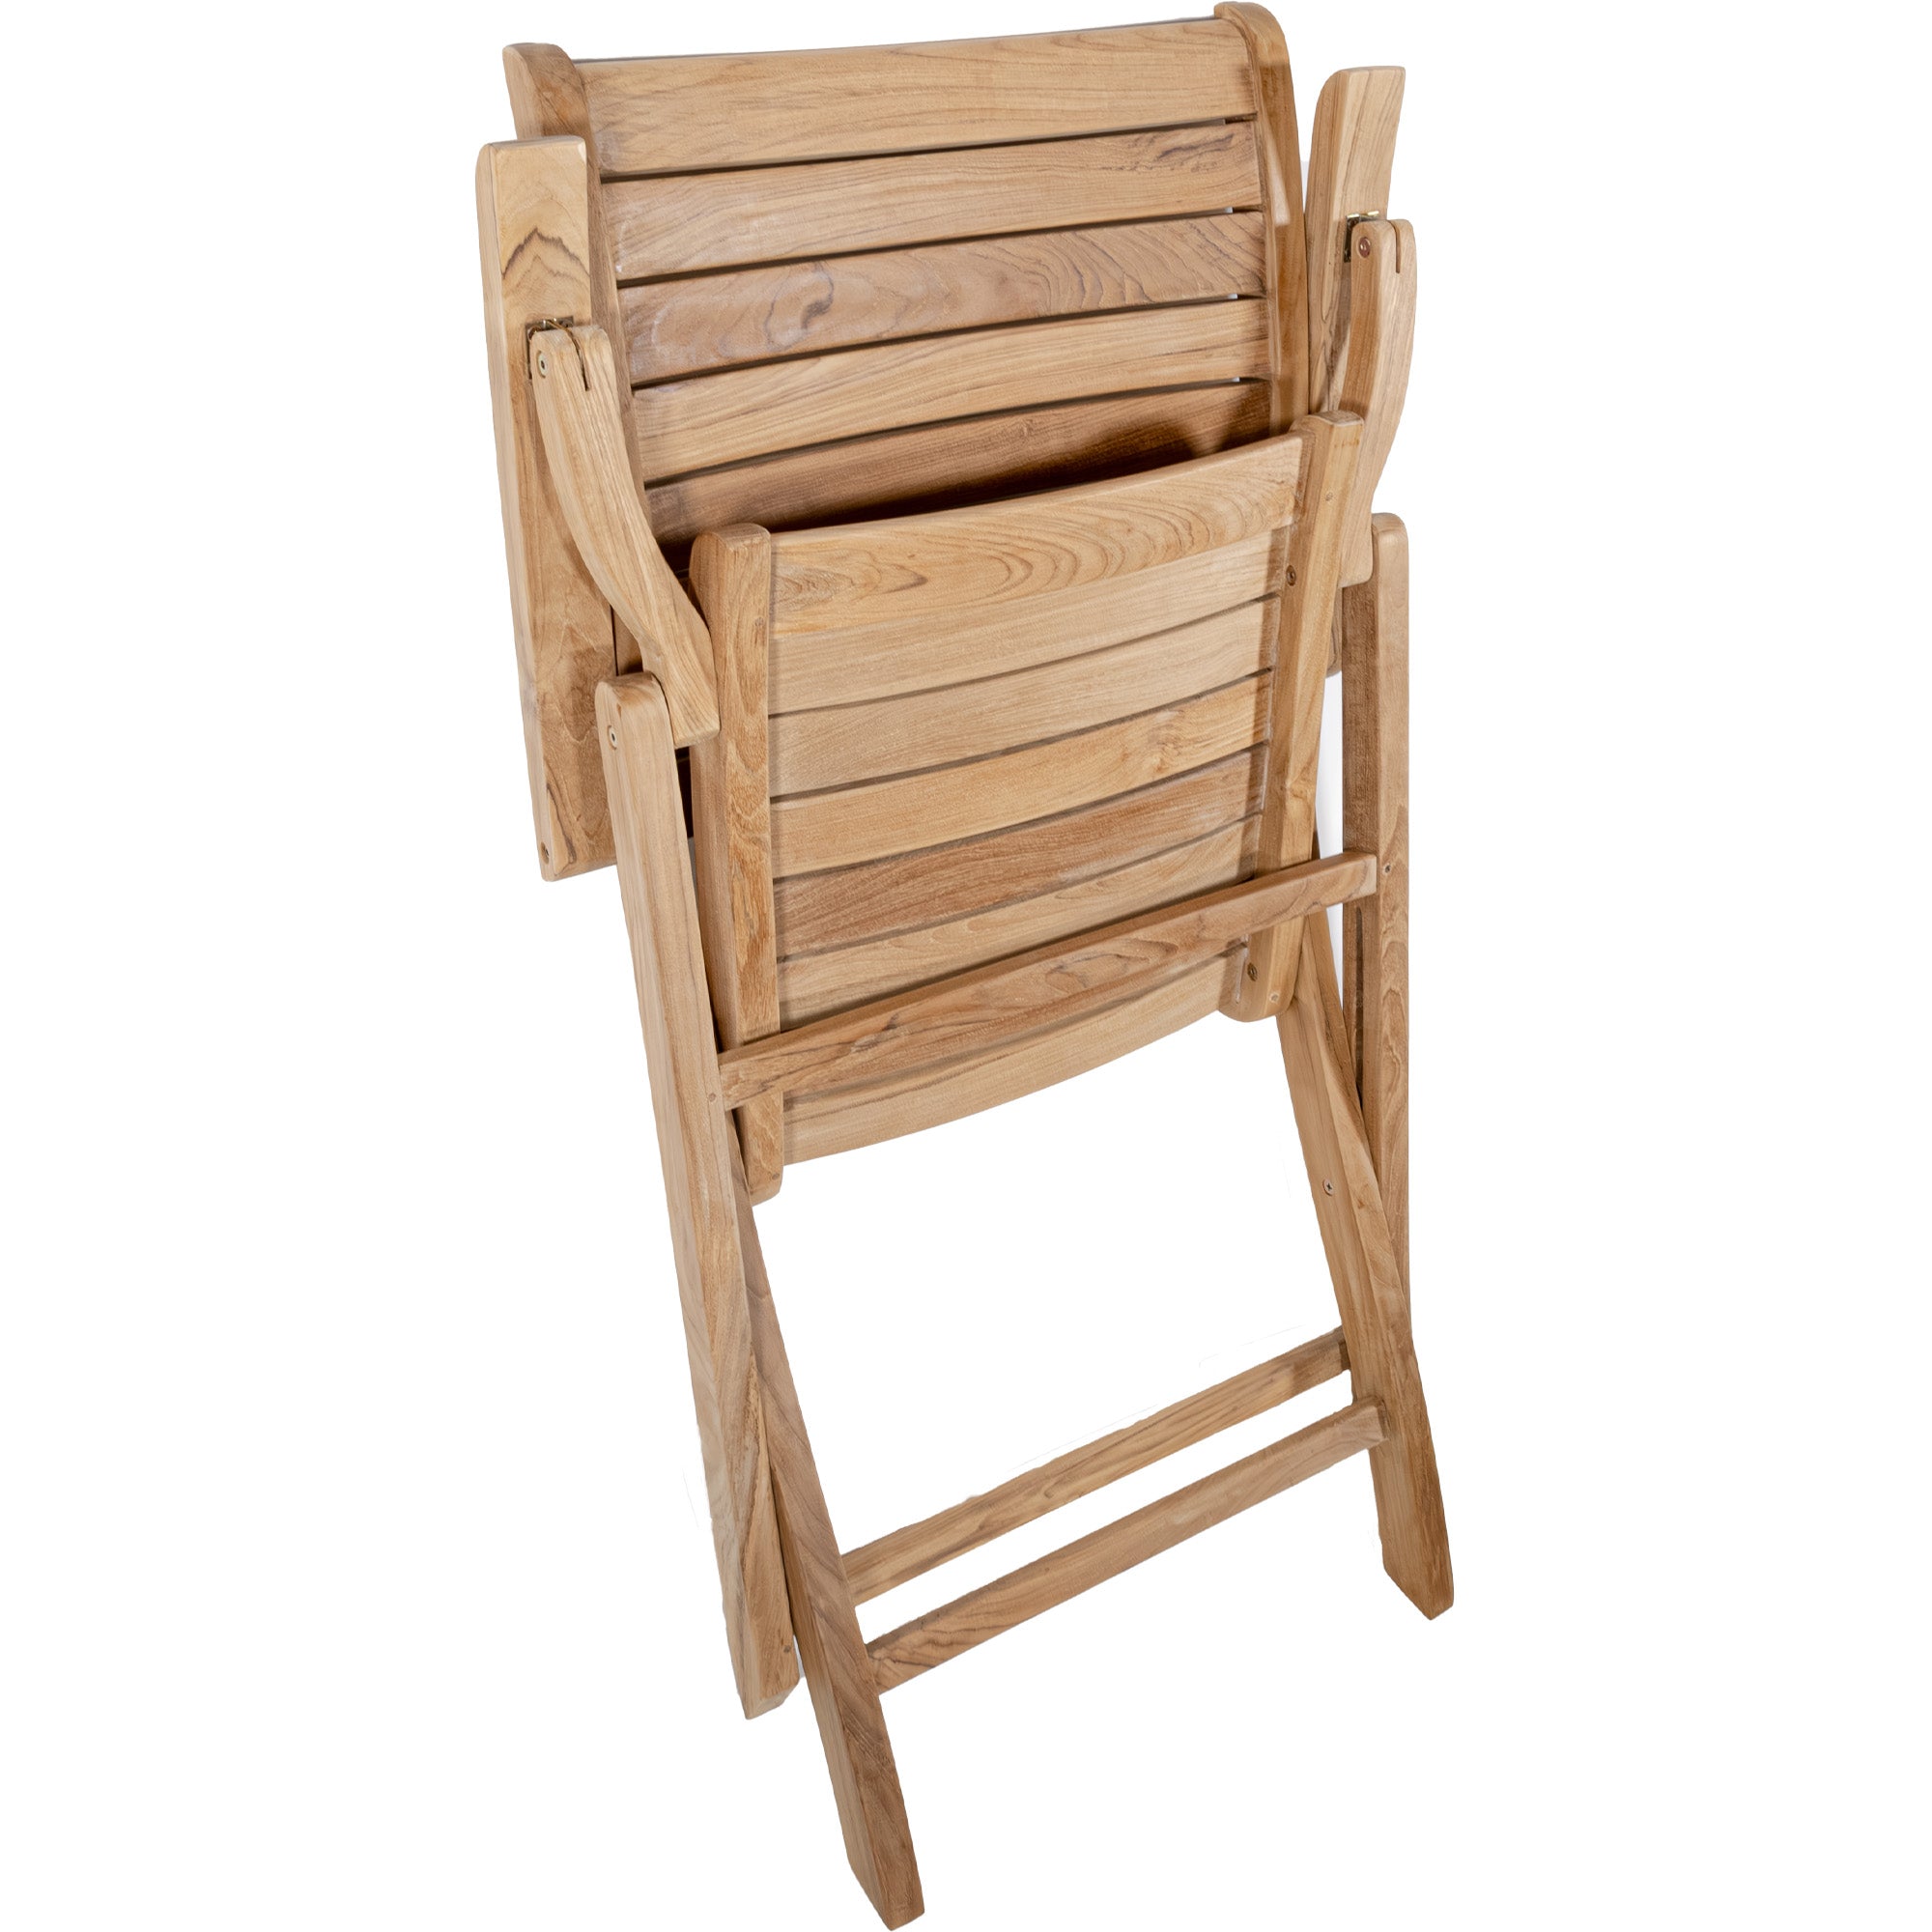 Sequoia Natural Teak Outdoor Folding Chair with Arm Rests